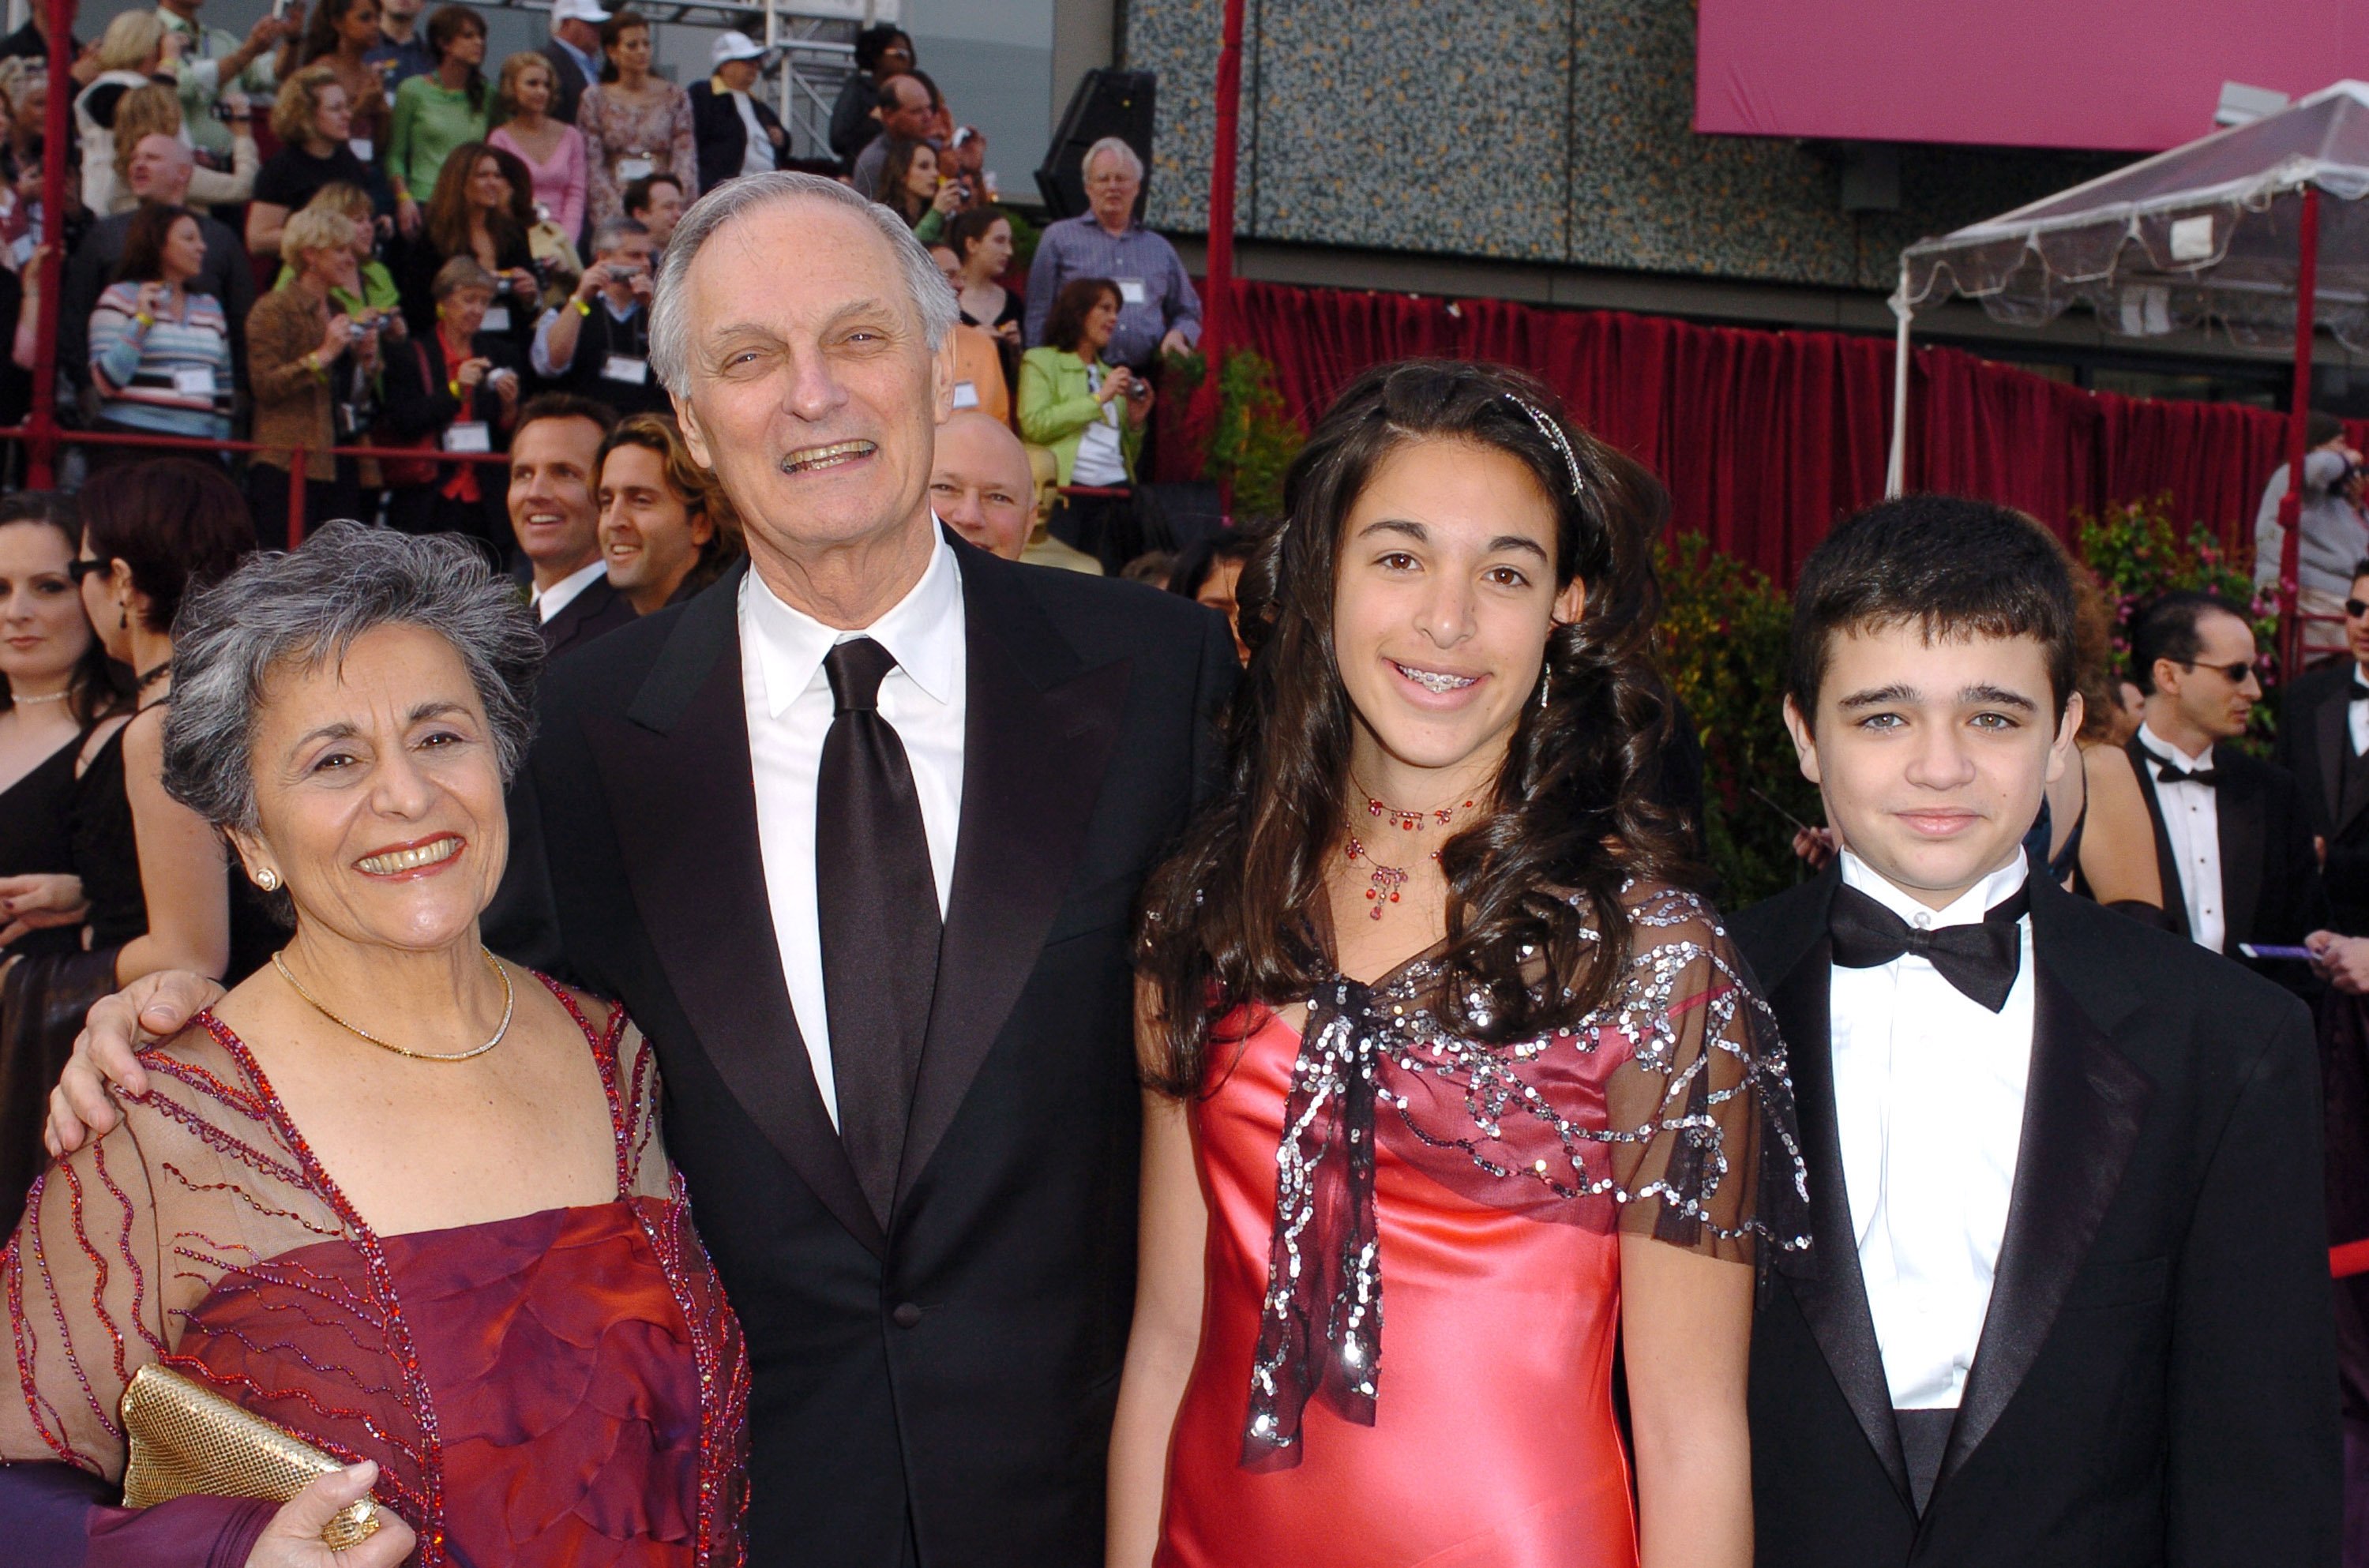 Alan and Arlene Alda and family at the 77th Annual Academy Awards on February 27, 2005 | Source: Getty Images